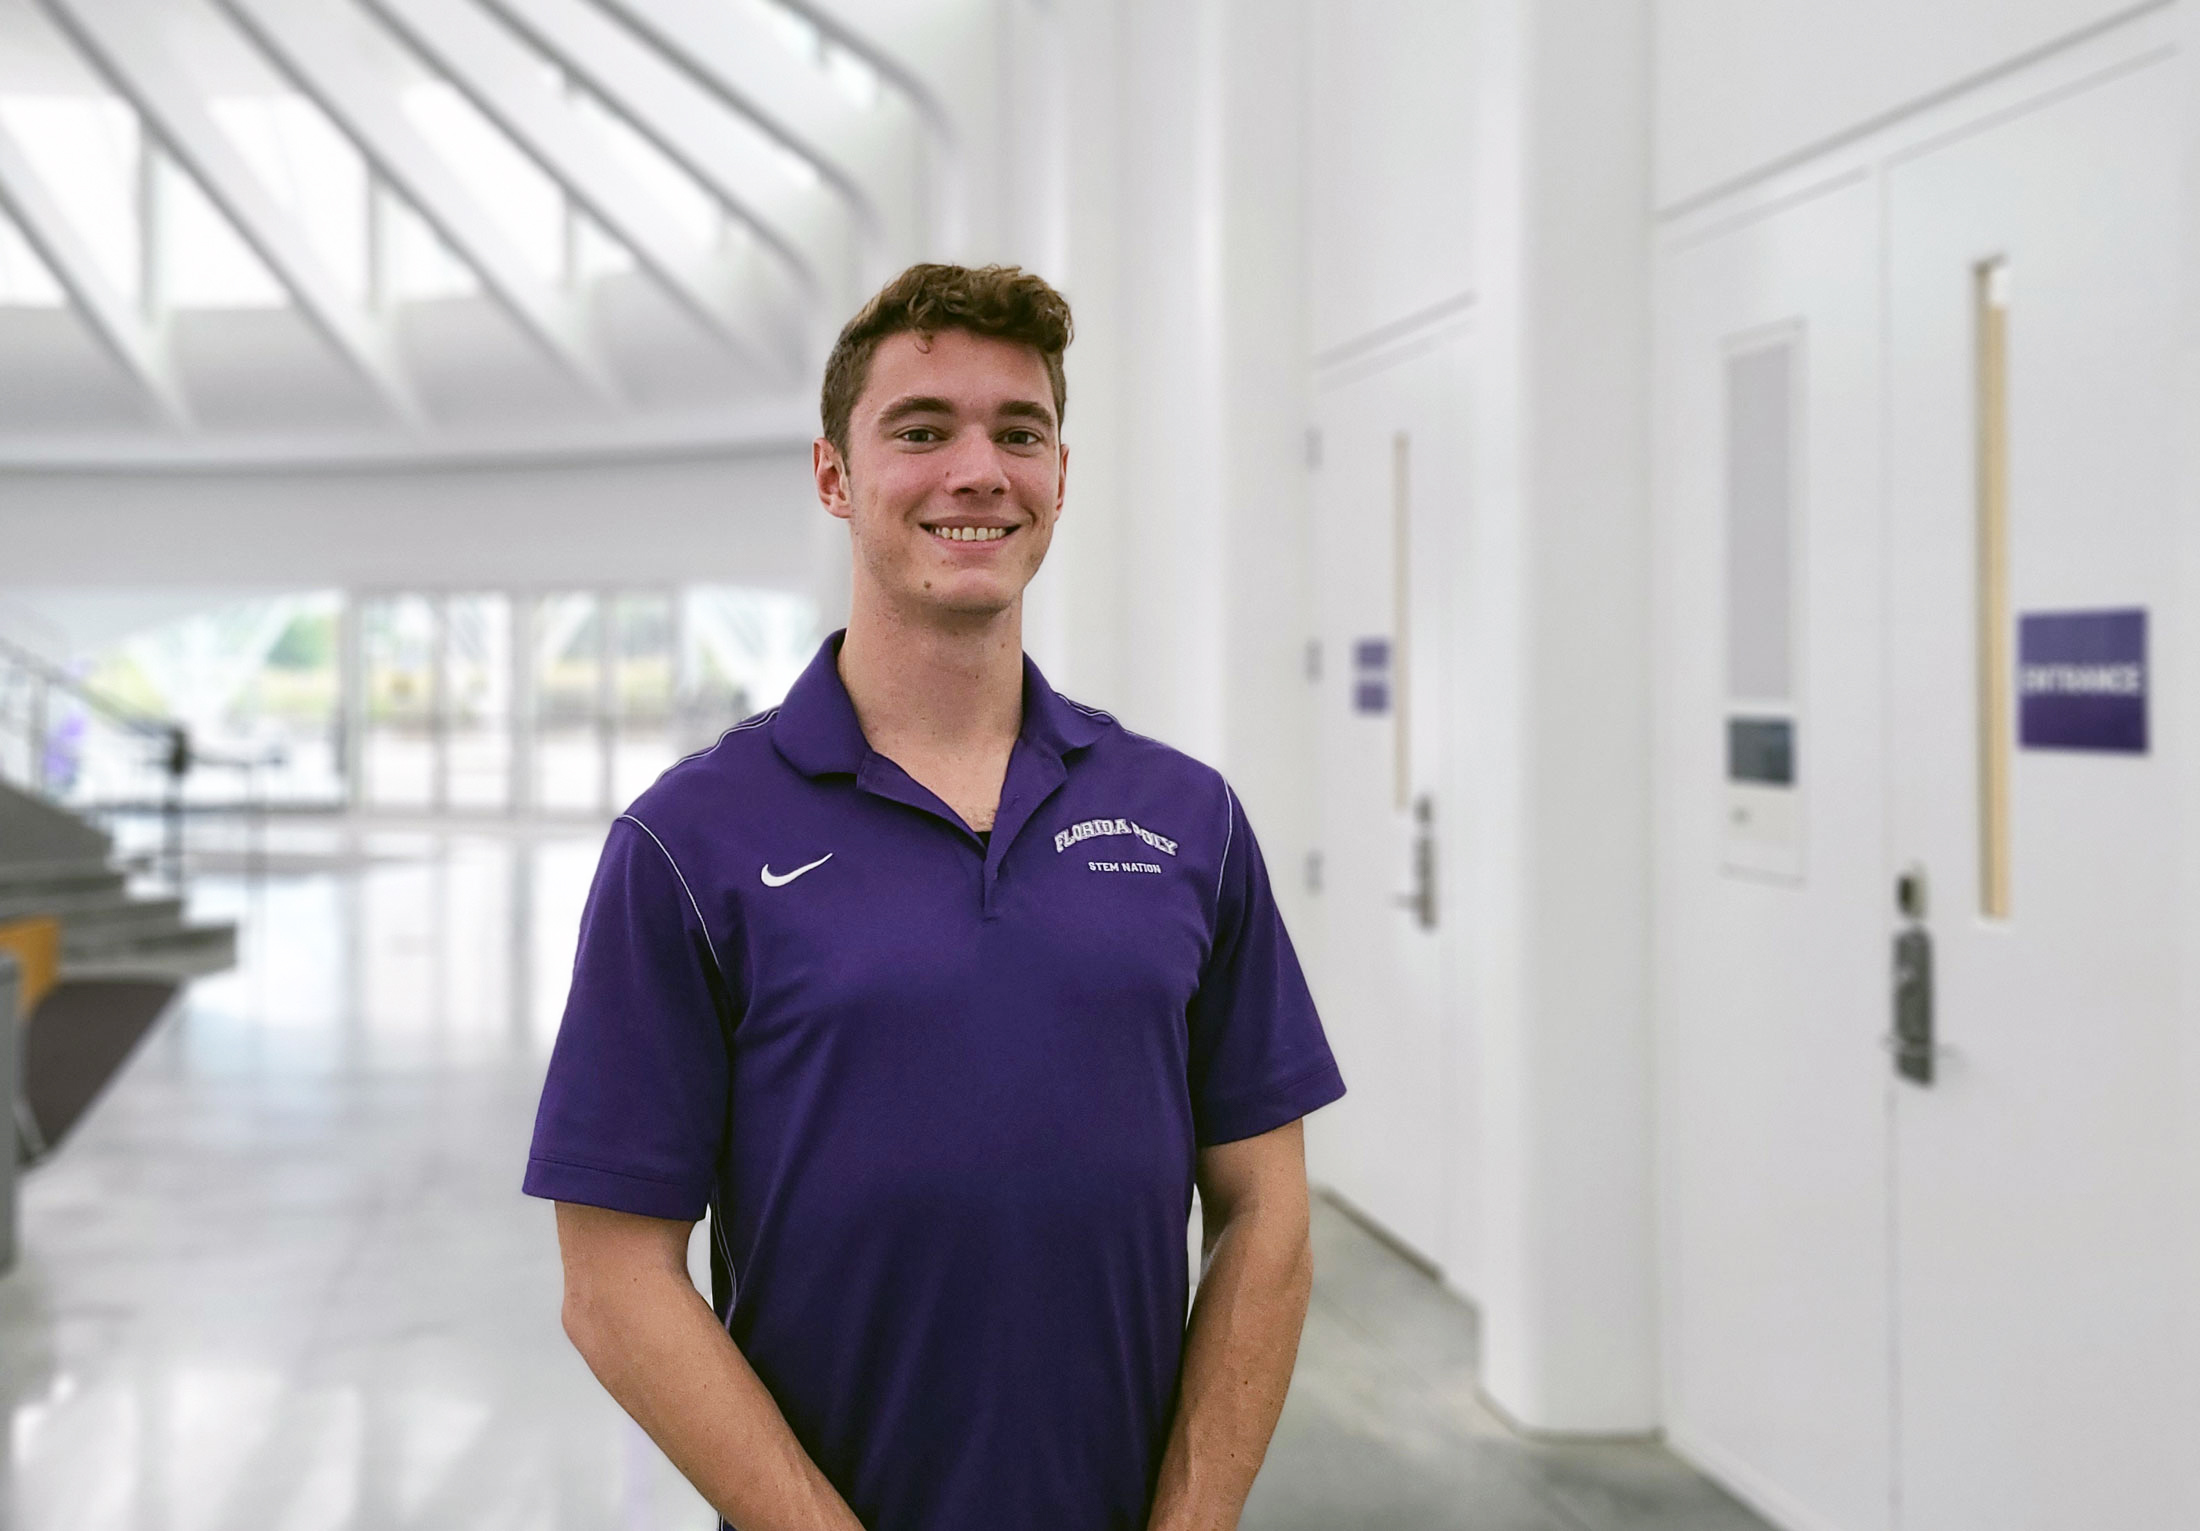 Transfer student finds personal, academic success